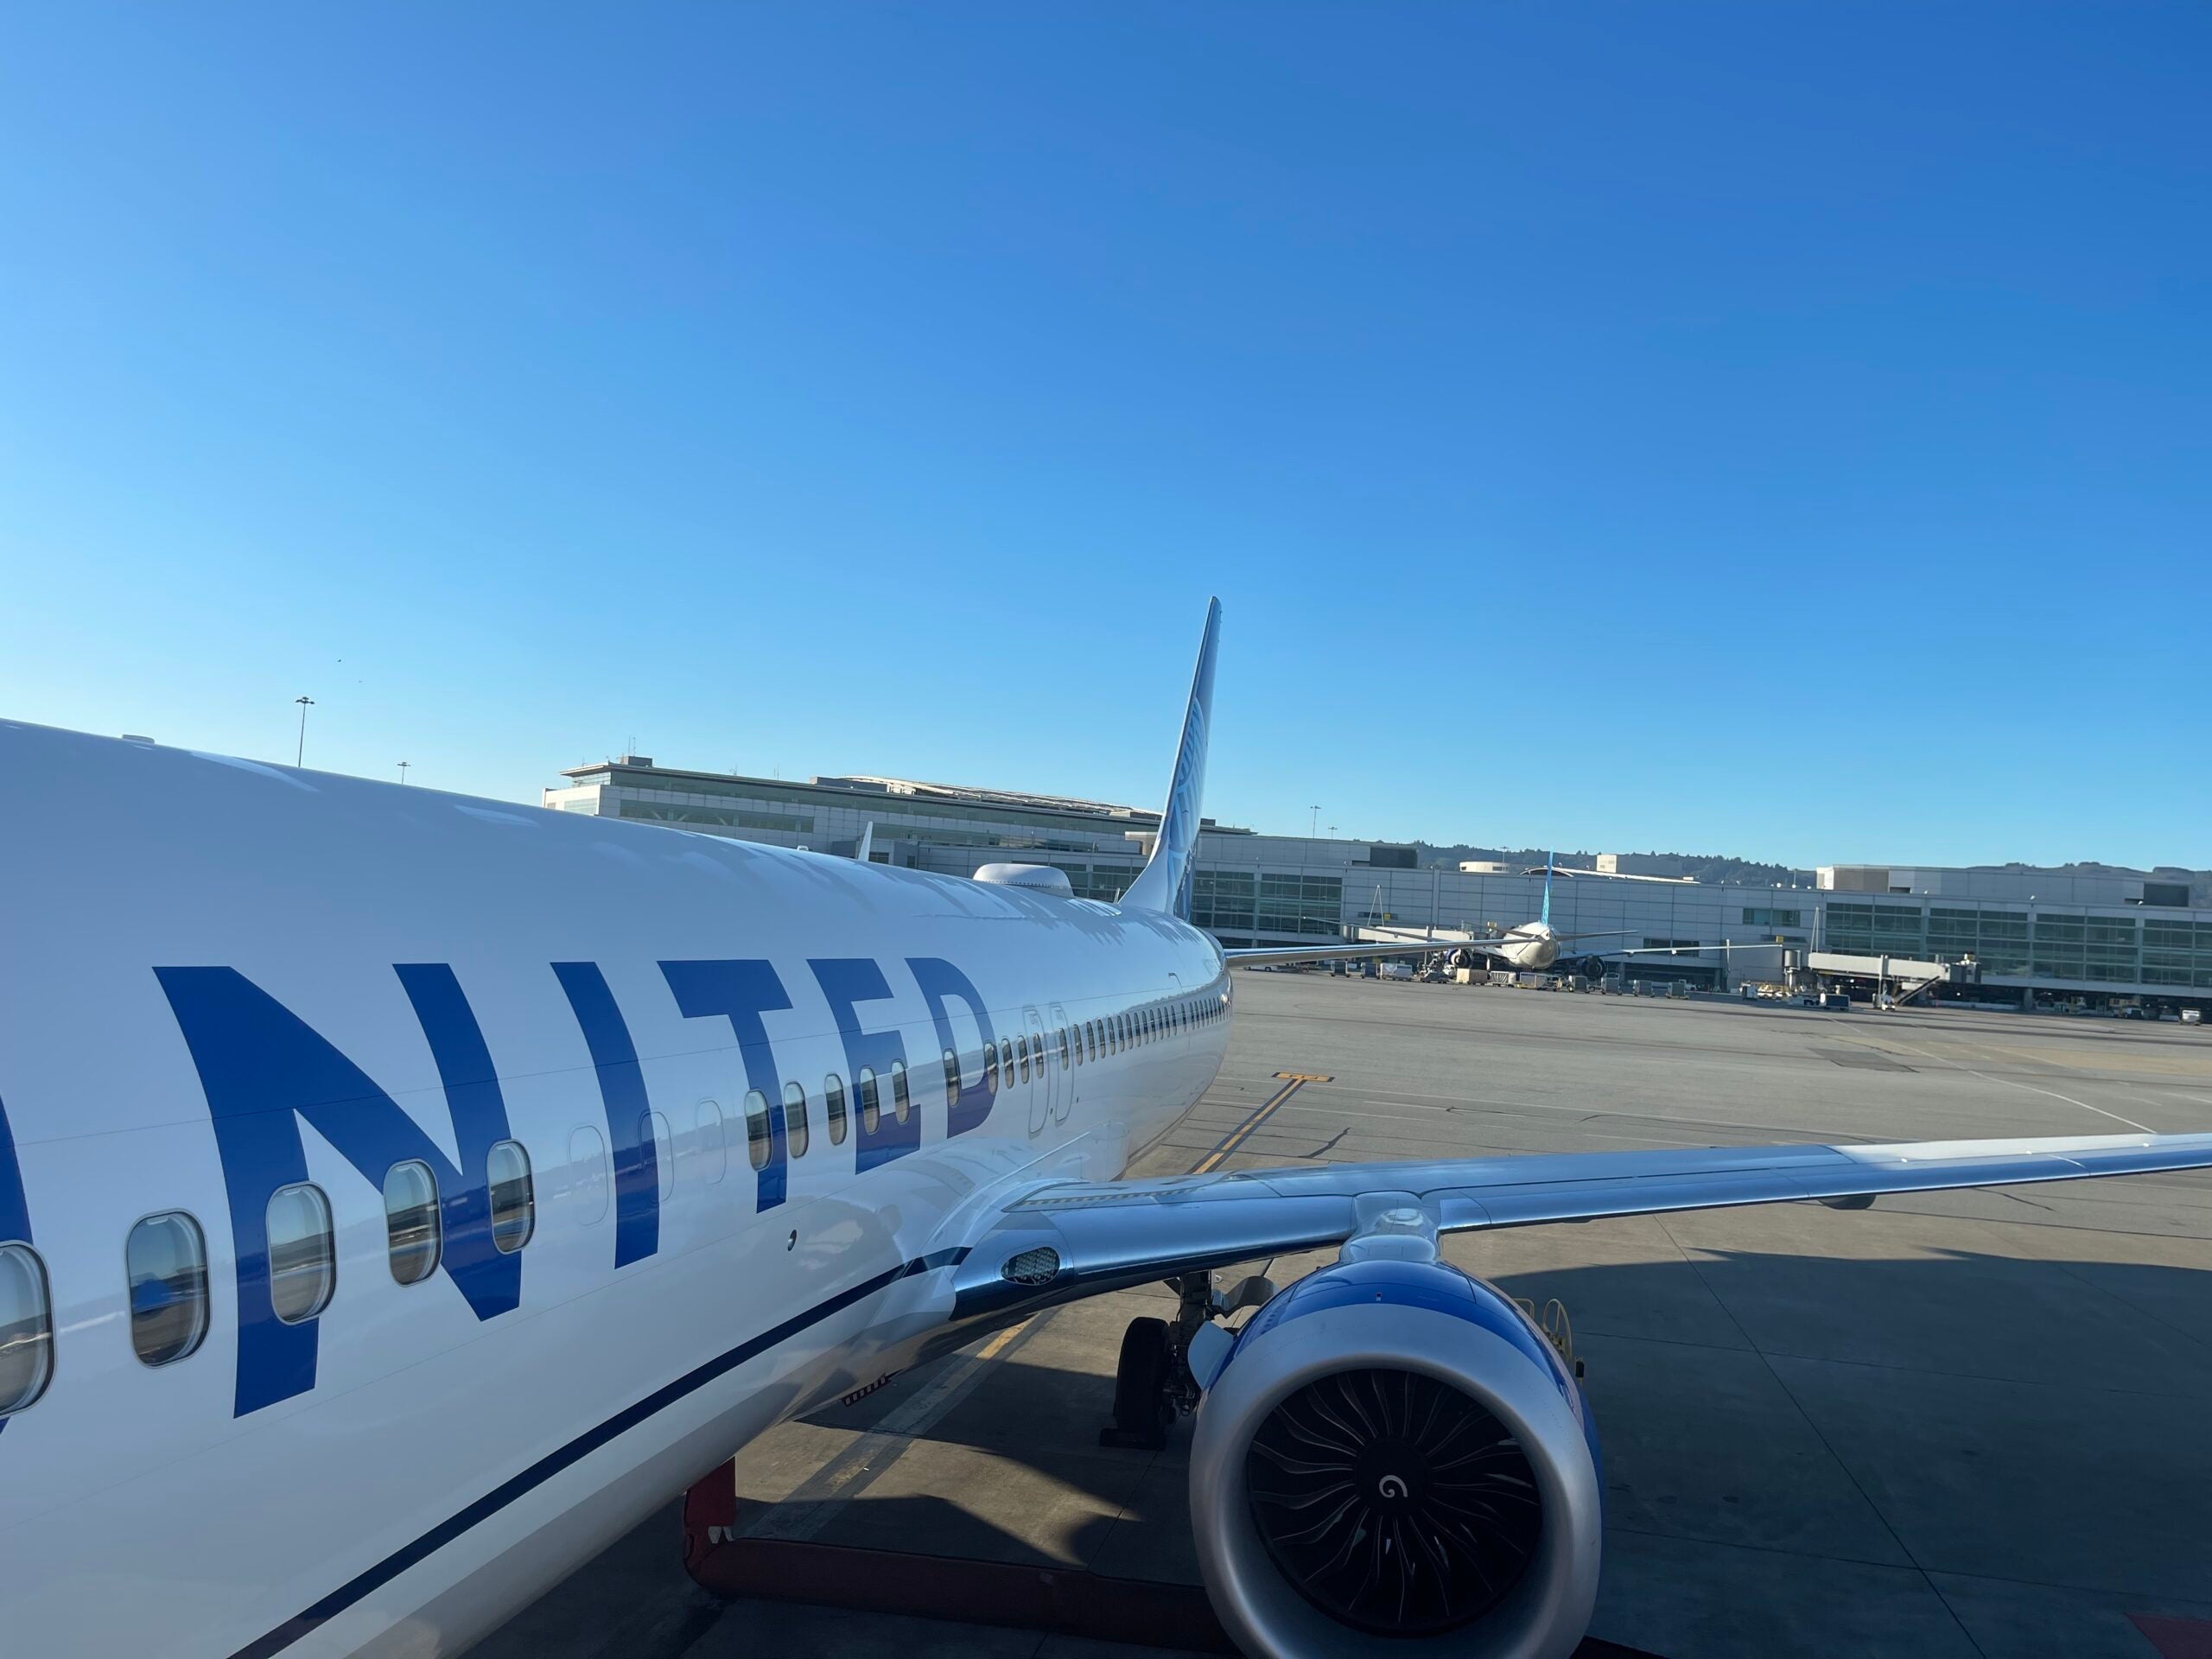 The ultimate guide to getting upgraded on United Airlines